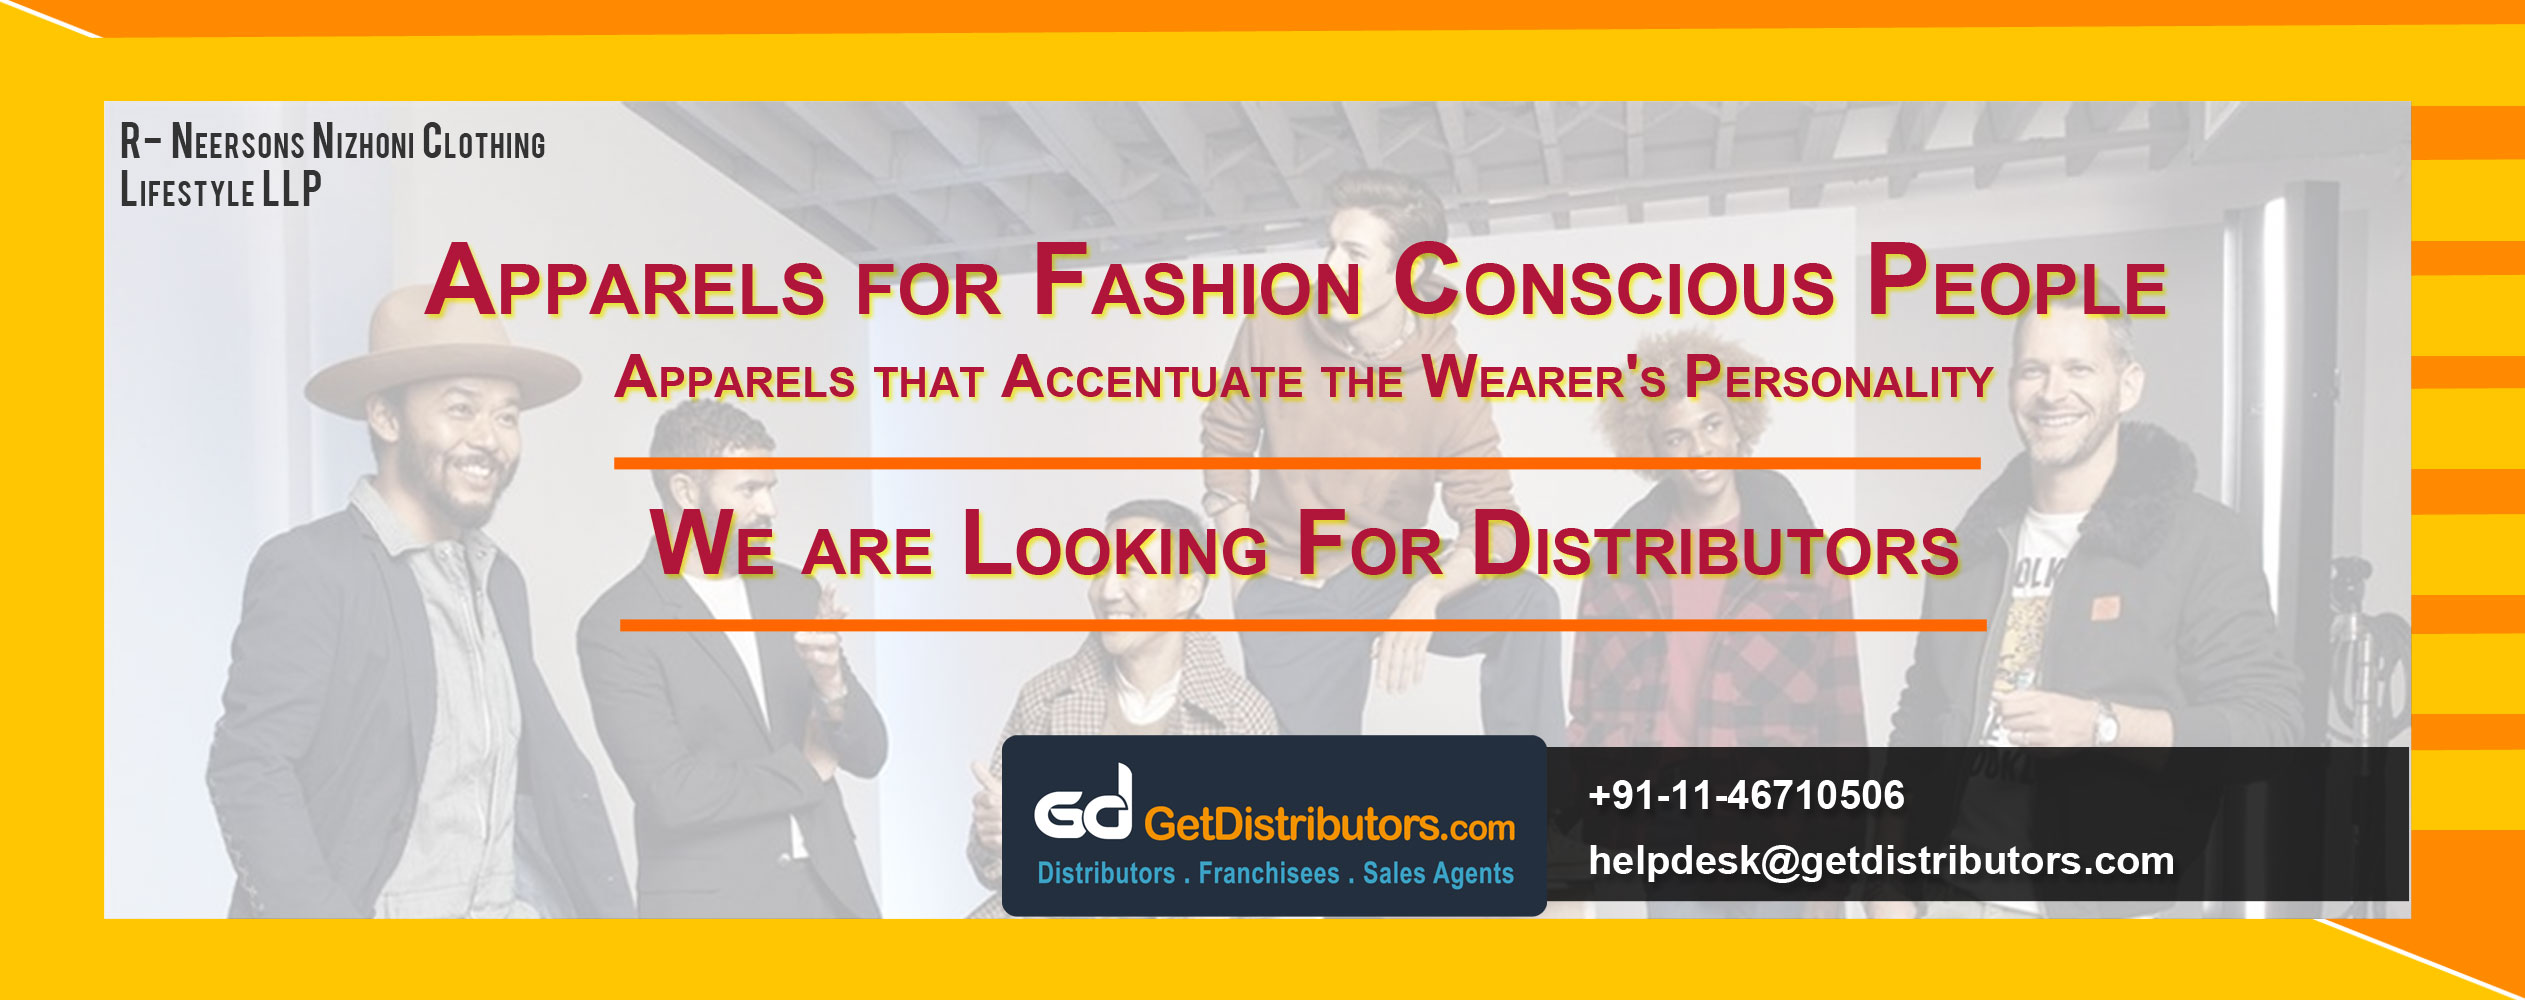 Our EYE catching apparels Looking for Distributor